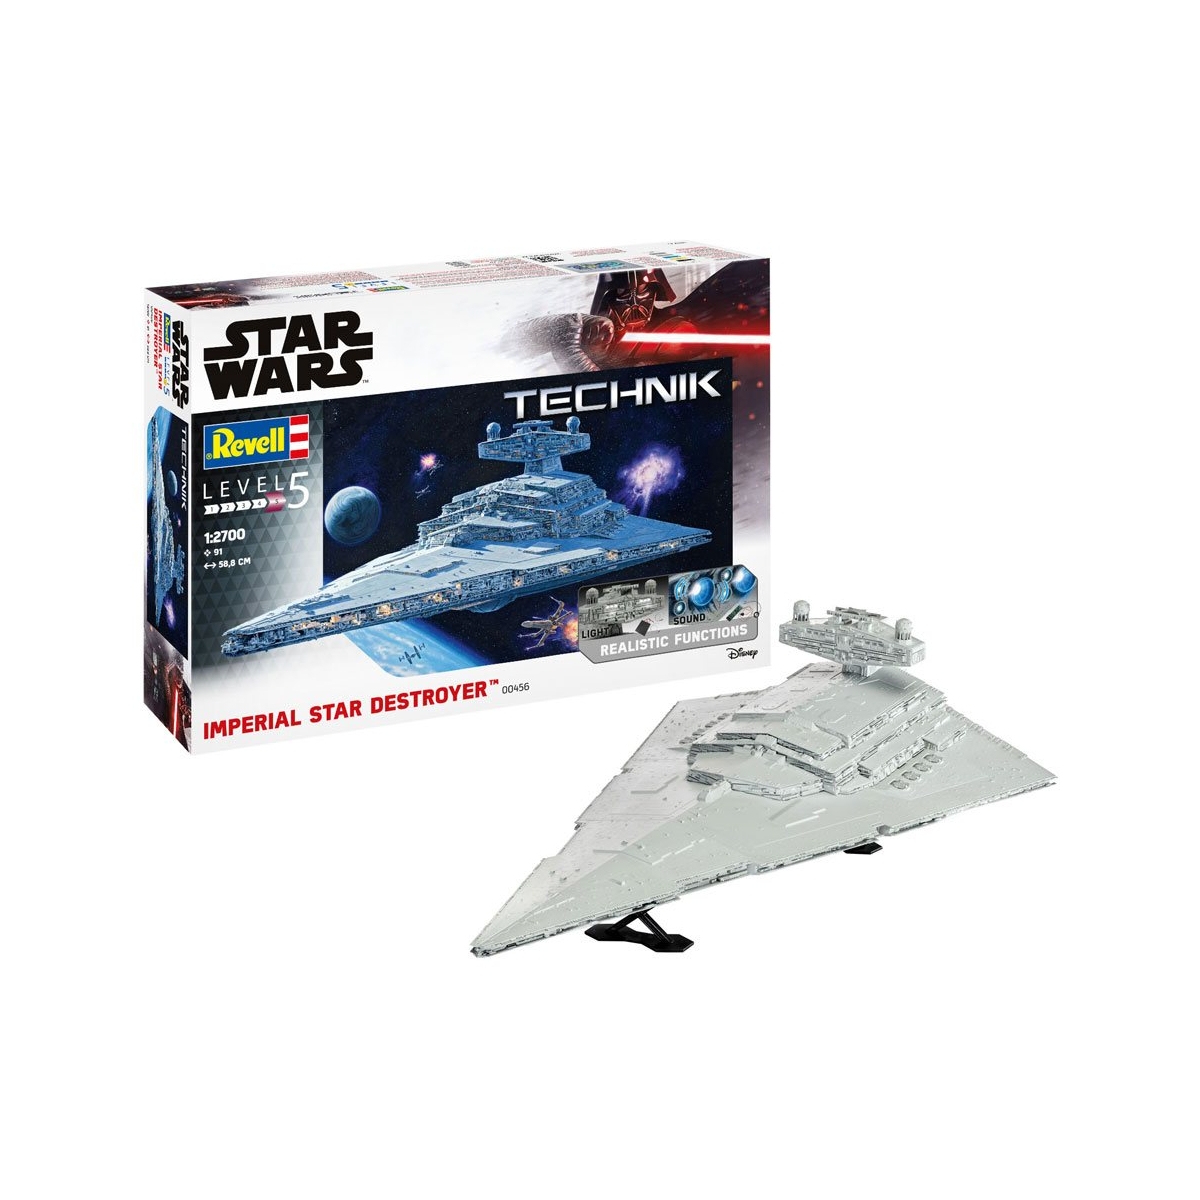 Star Wars maquette sonore et lumineuse le Imperial Star Destroyer 59cm Preorder 